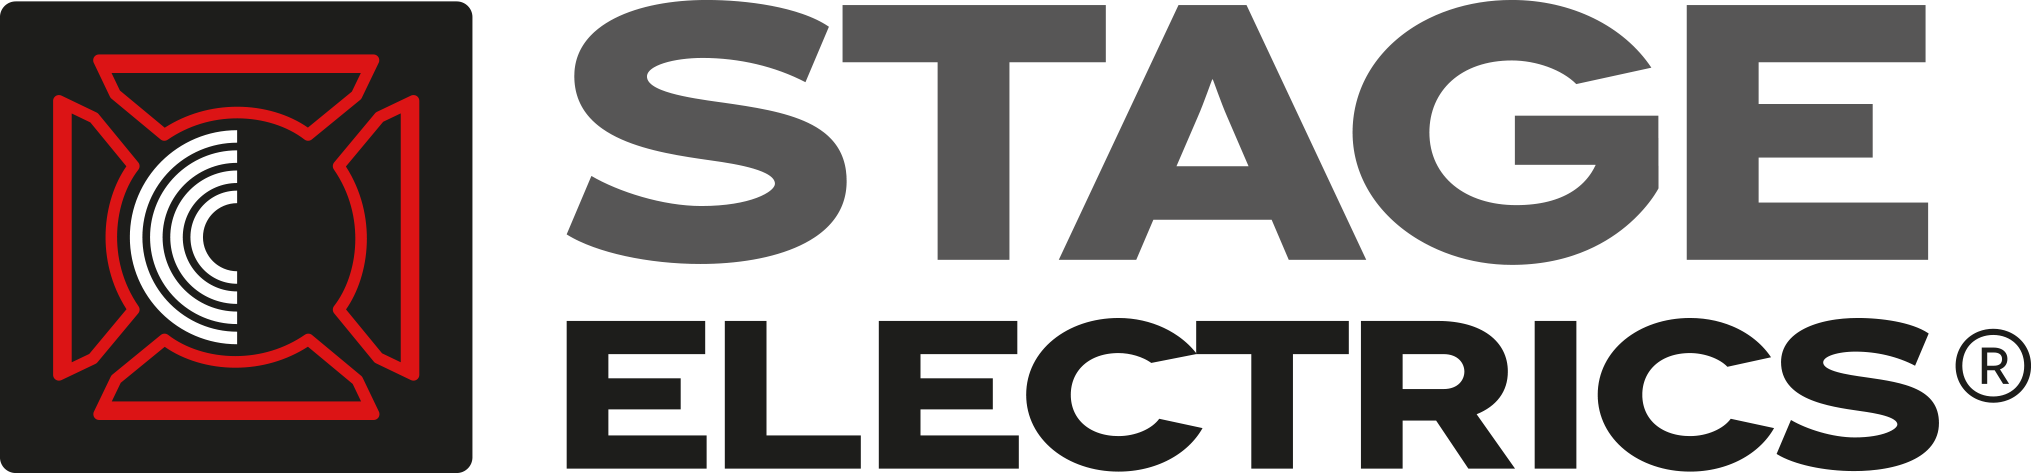 logo for Stage Electrics